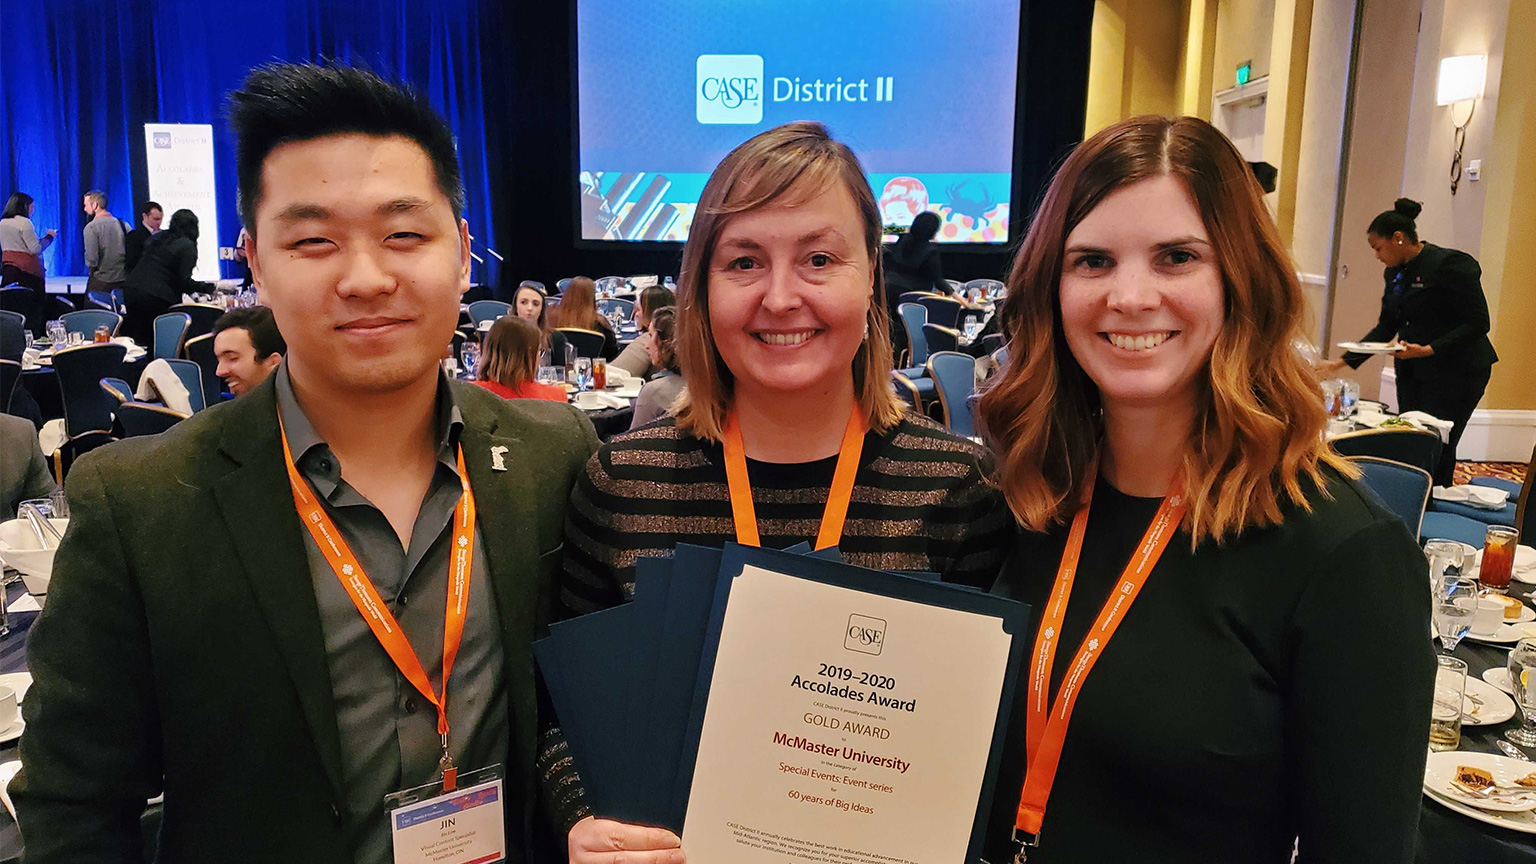 Jin Lee, Monique Beech and Ciara McCann from the Faculty of Engineering’s communications team pose with their award at the CASE District II awards event in Baltimore, Maryland.